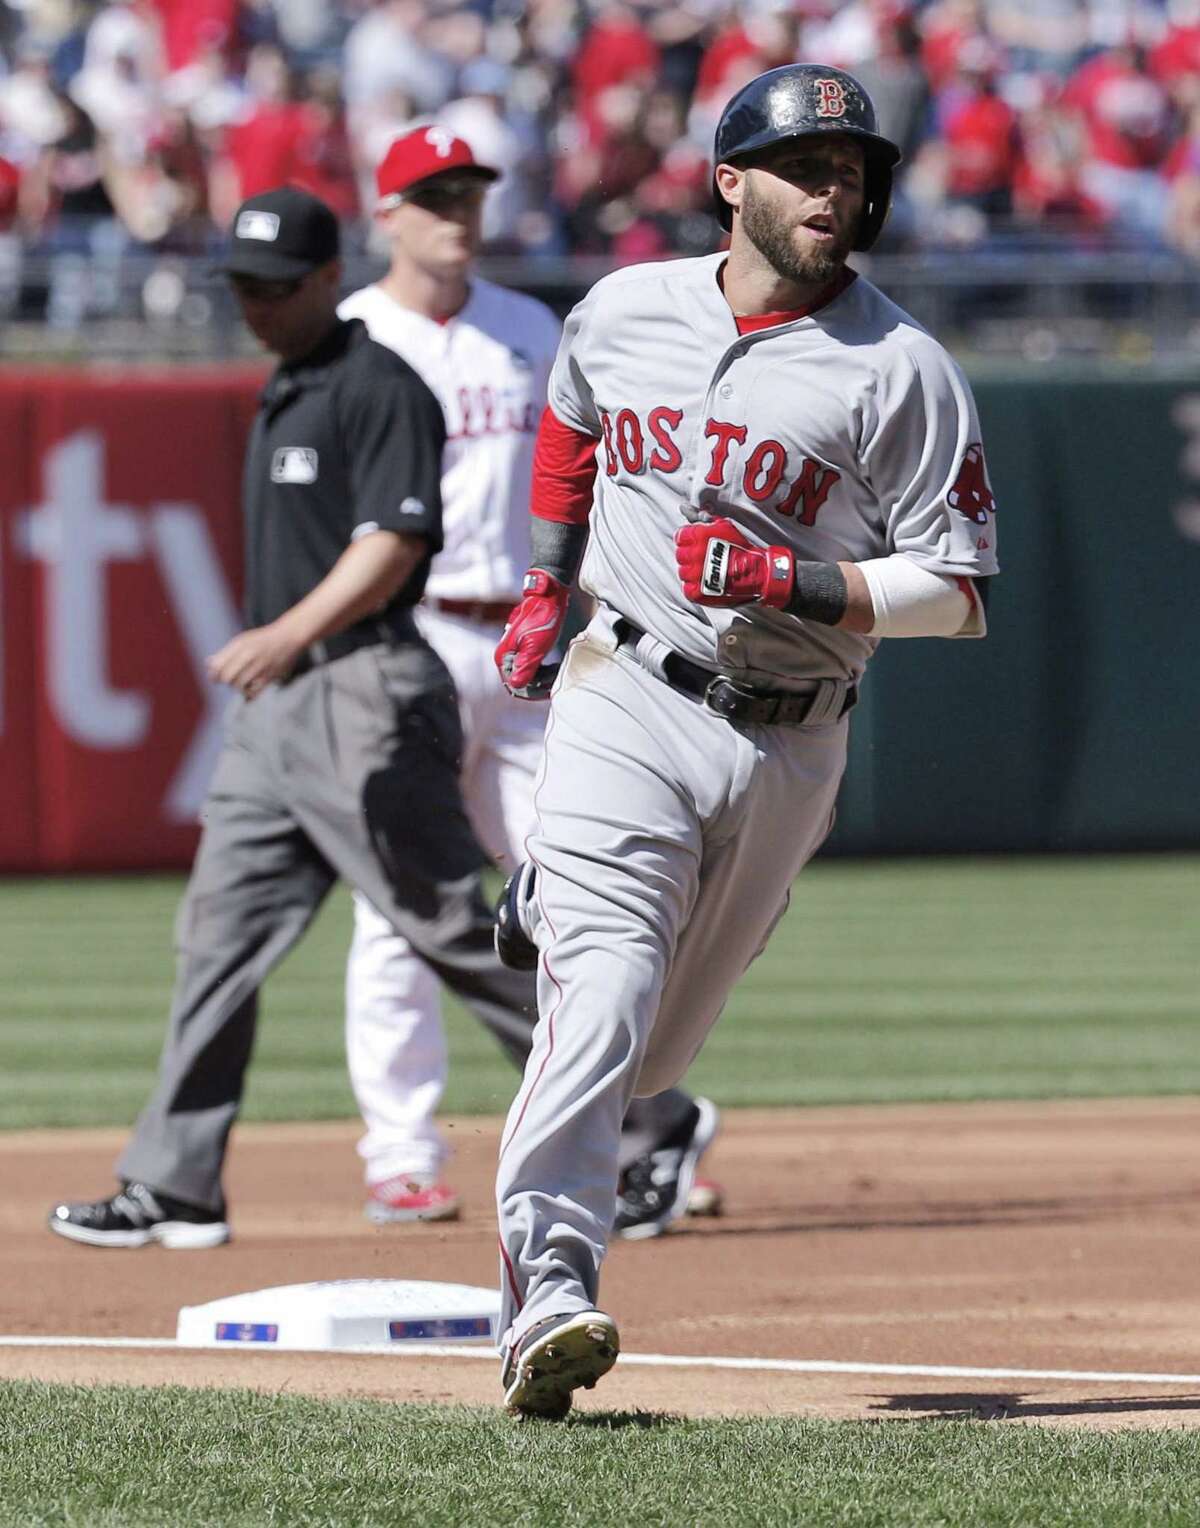 Boston Red Sox Dustin Pedroia rounds third base after hitting a solo home run during the first inning.